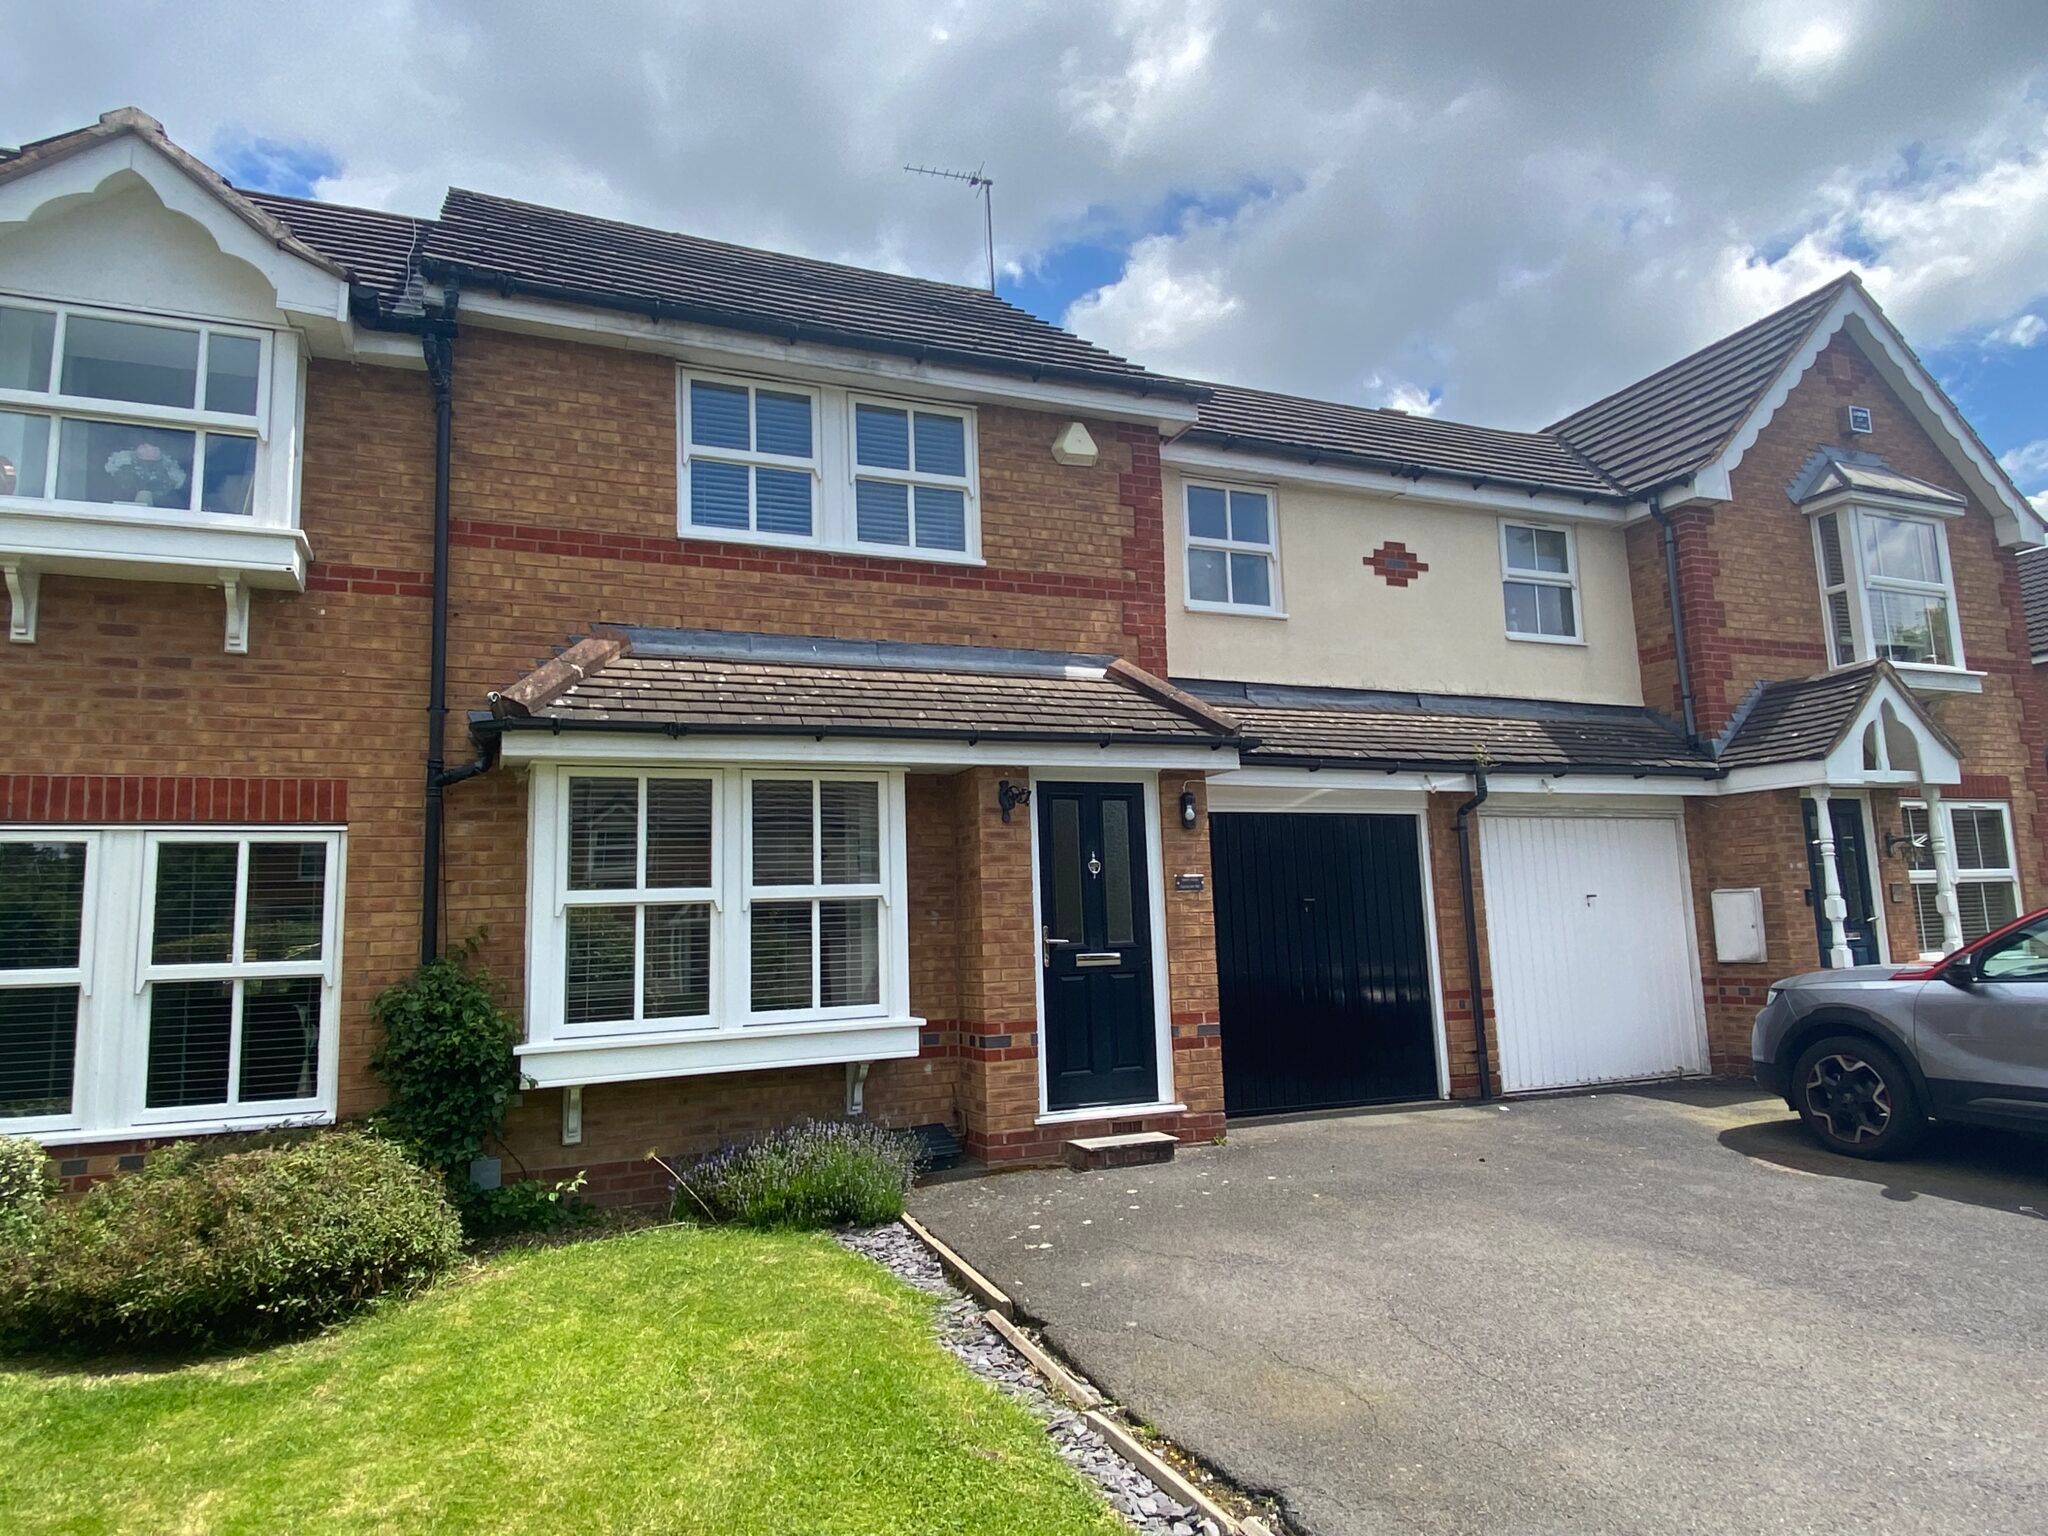 Chelthorn Way, Solihull, Solihull, B91 3FW